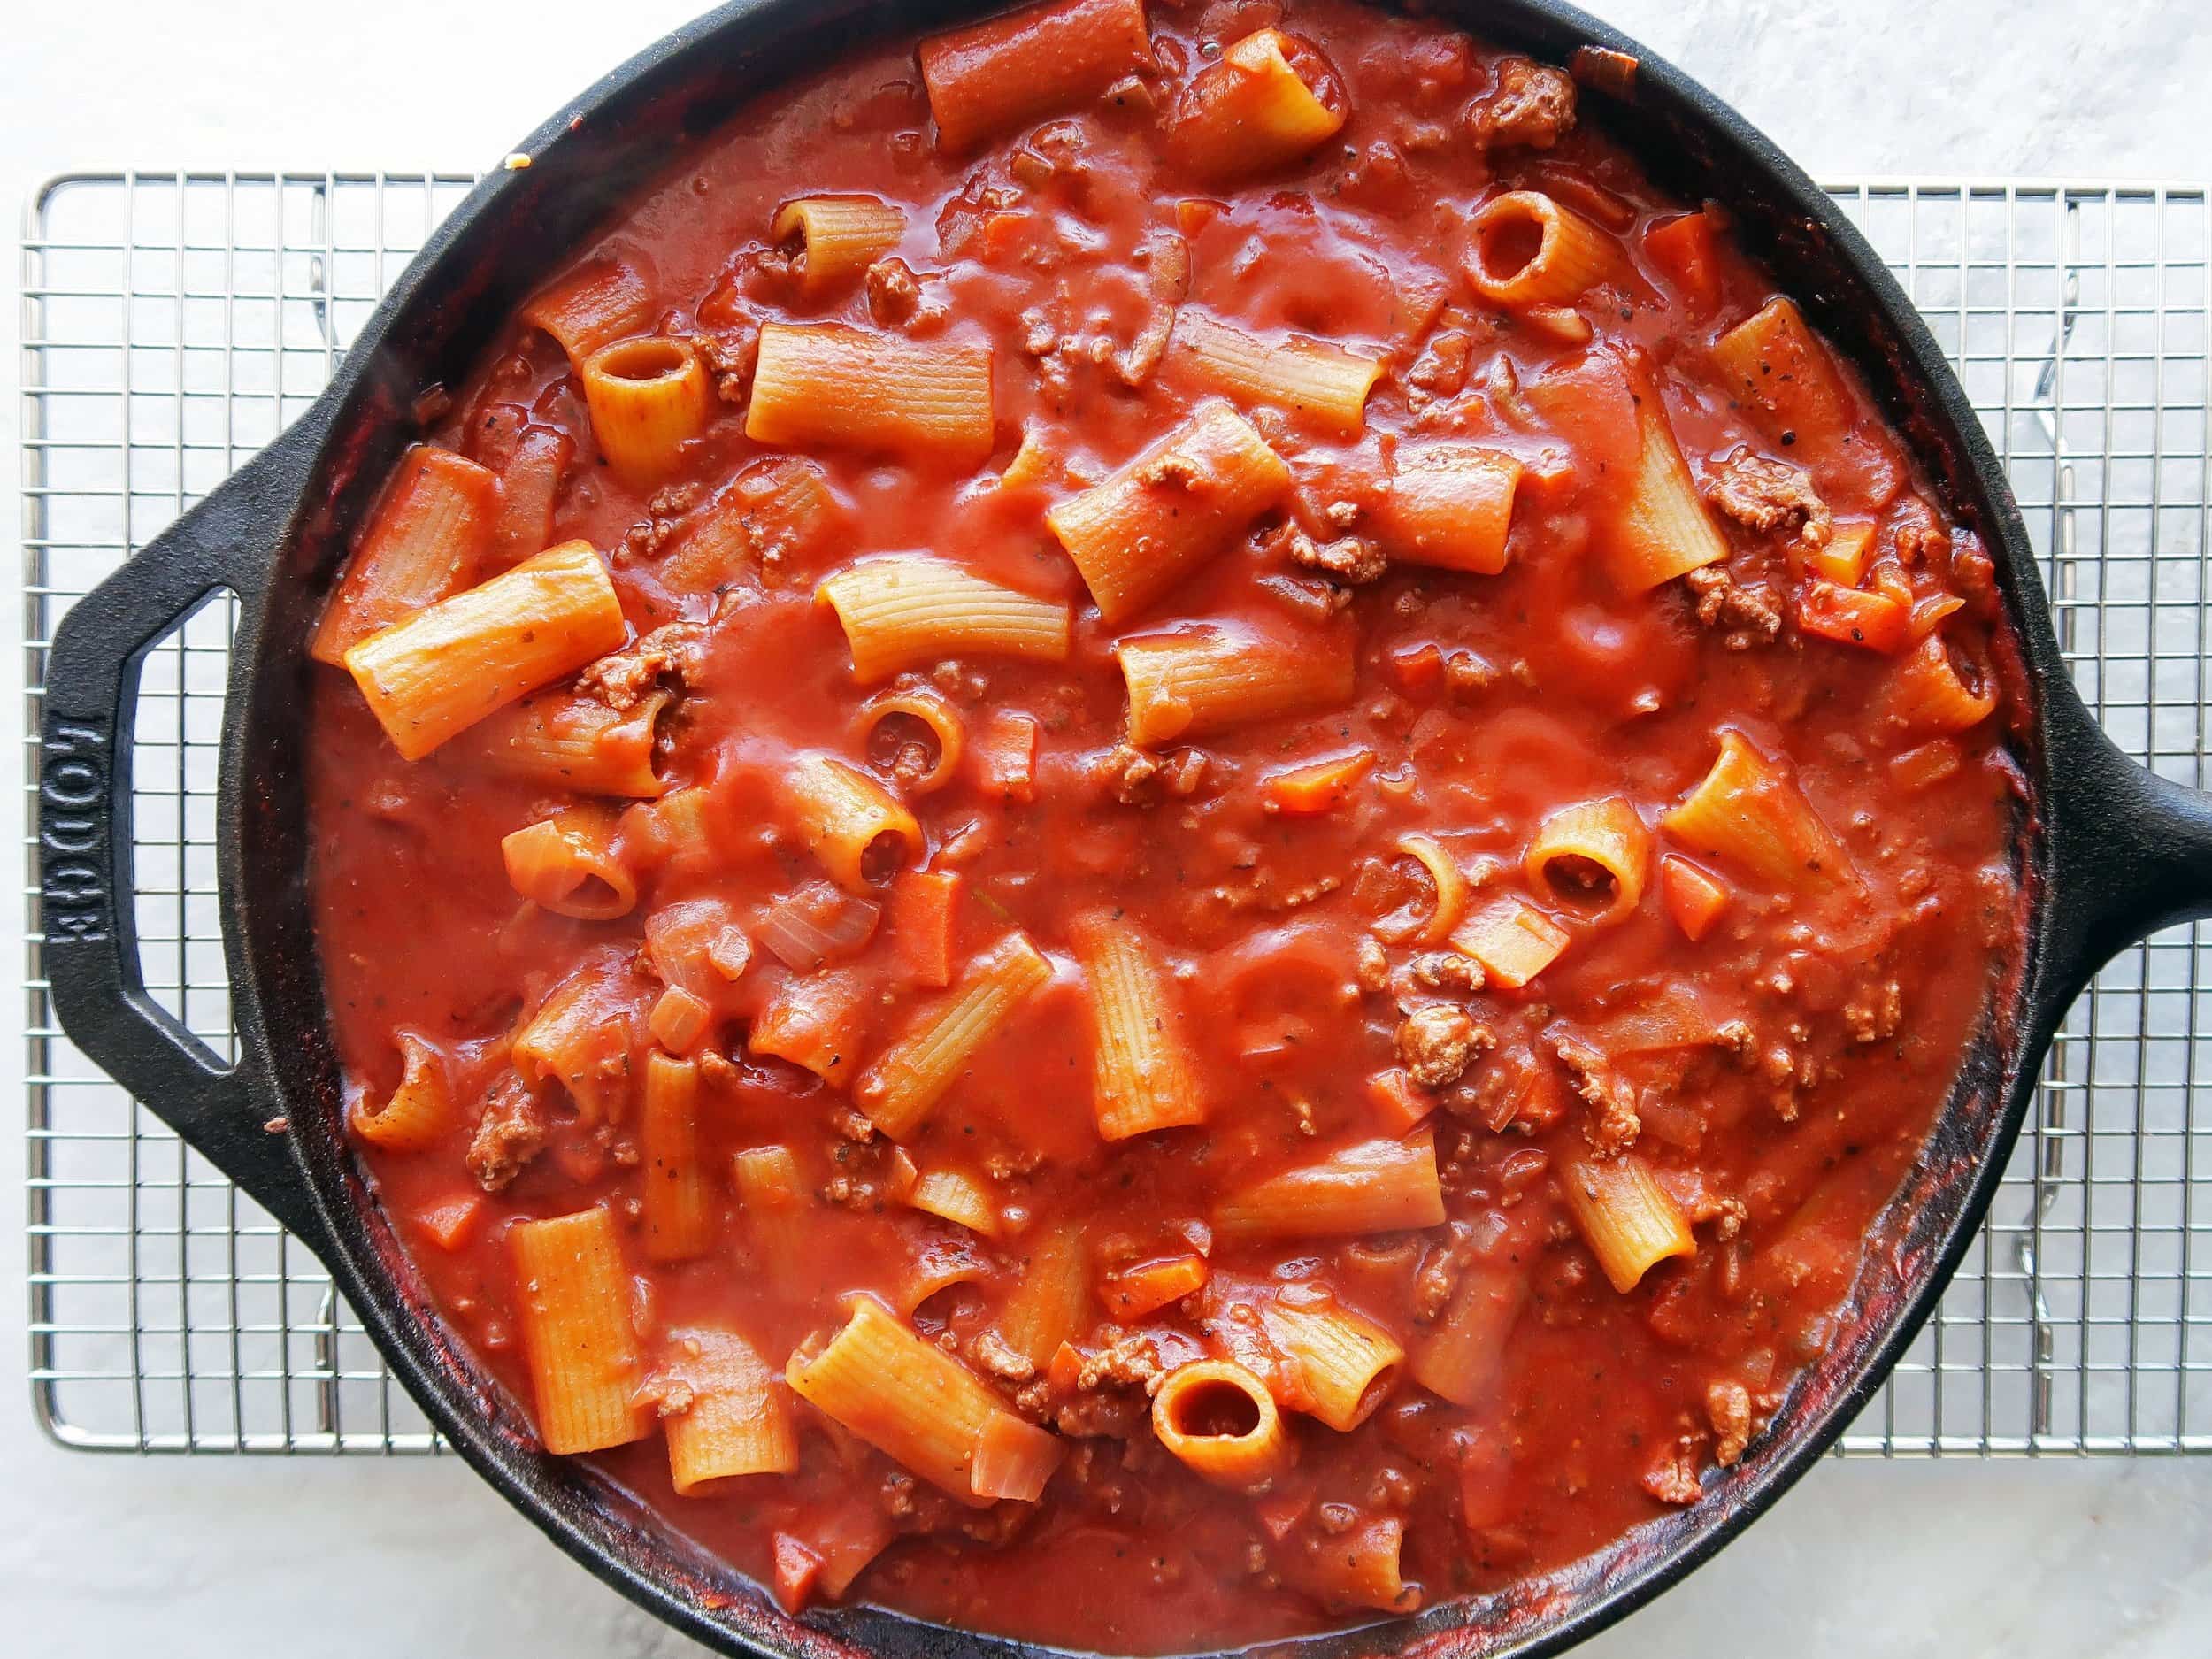 A cast iron skillet full of rigatoni with covered in meat sauce.